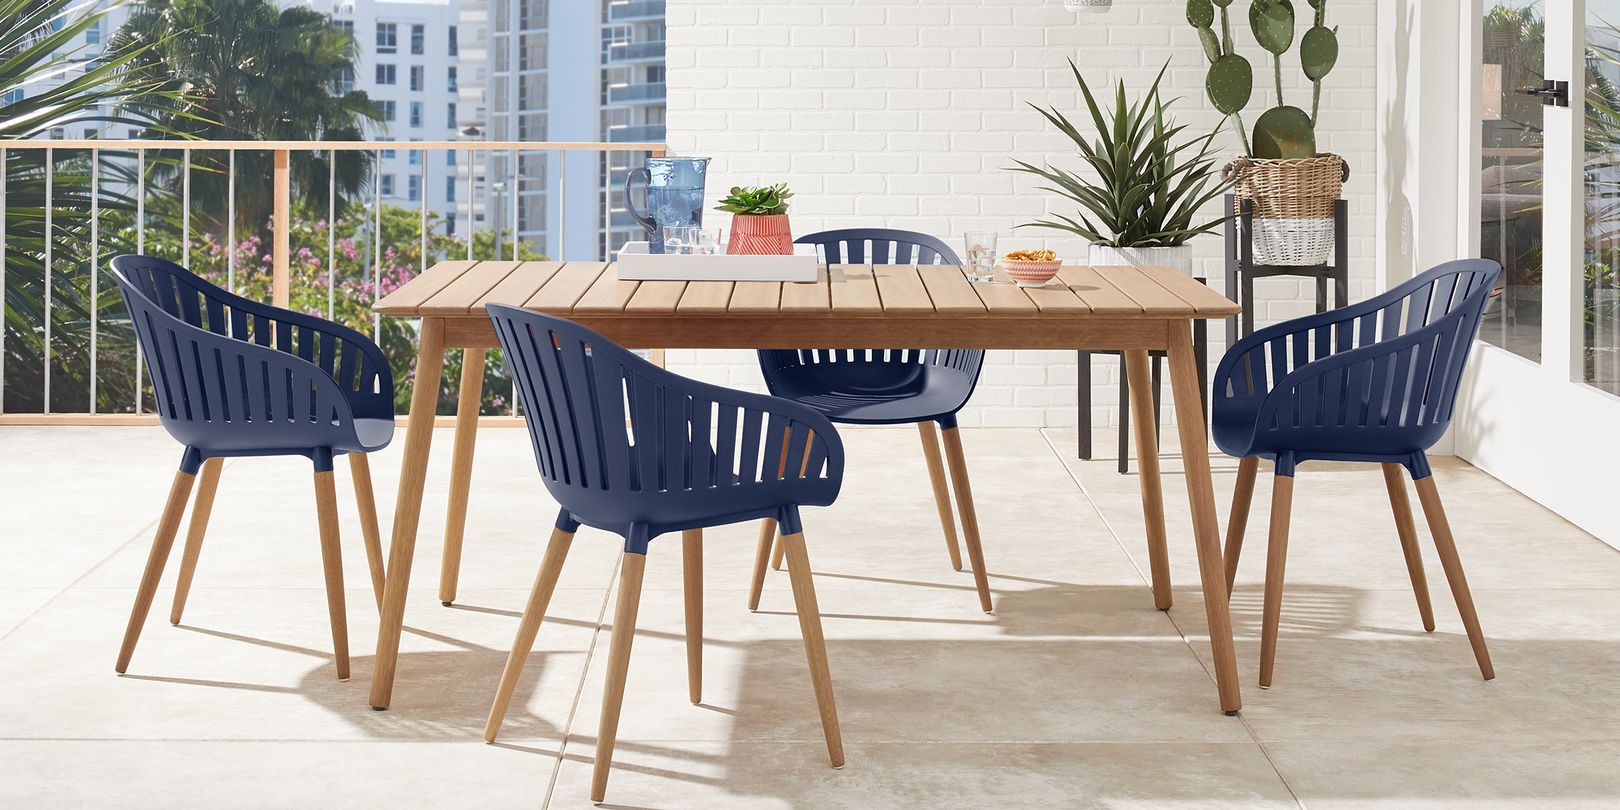 Photo of wooden mid-century modern outdoor table with blue chairs